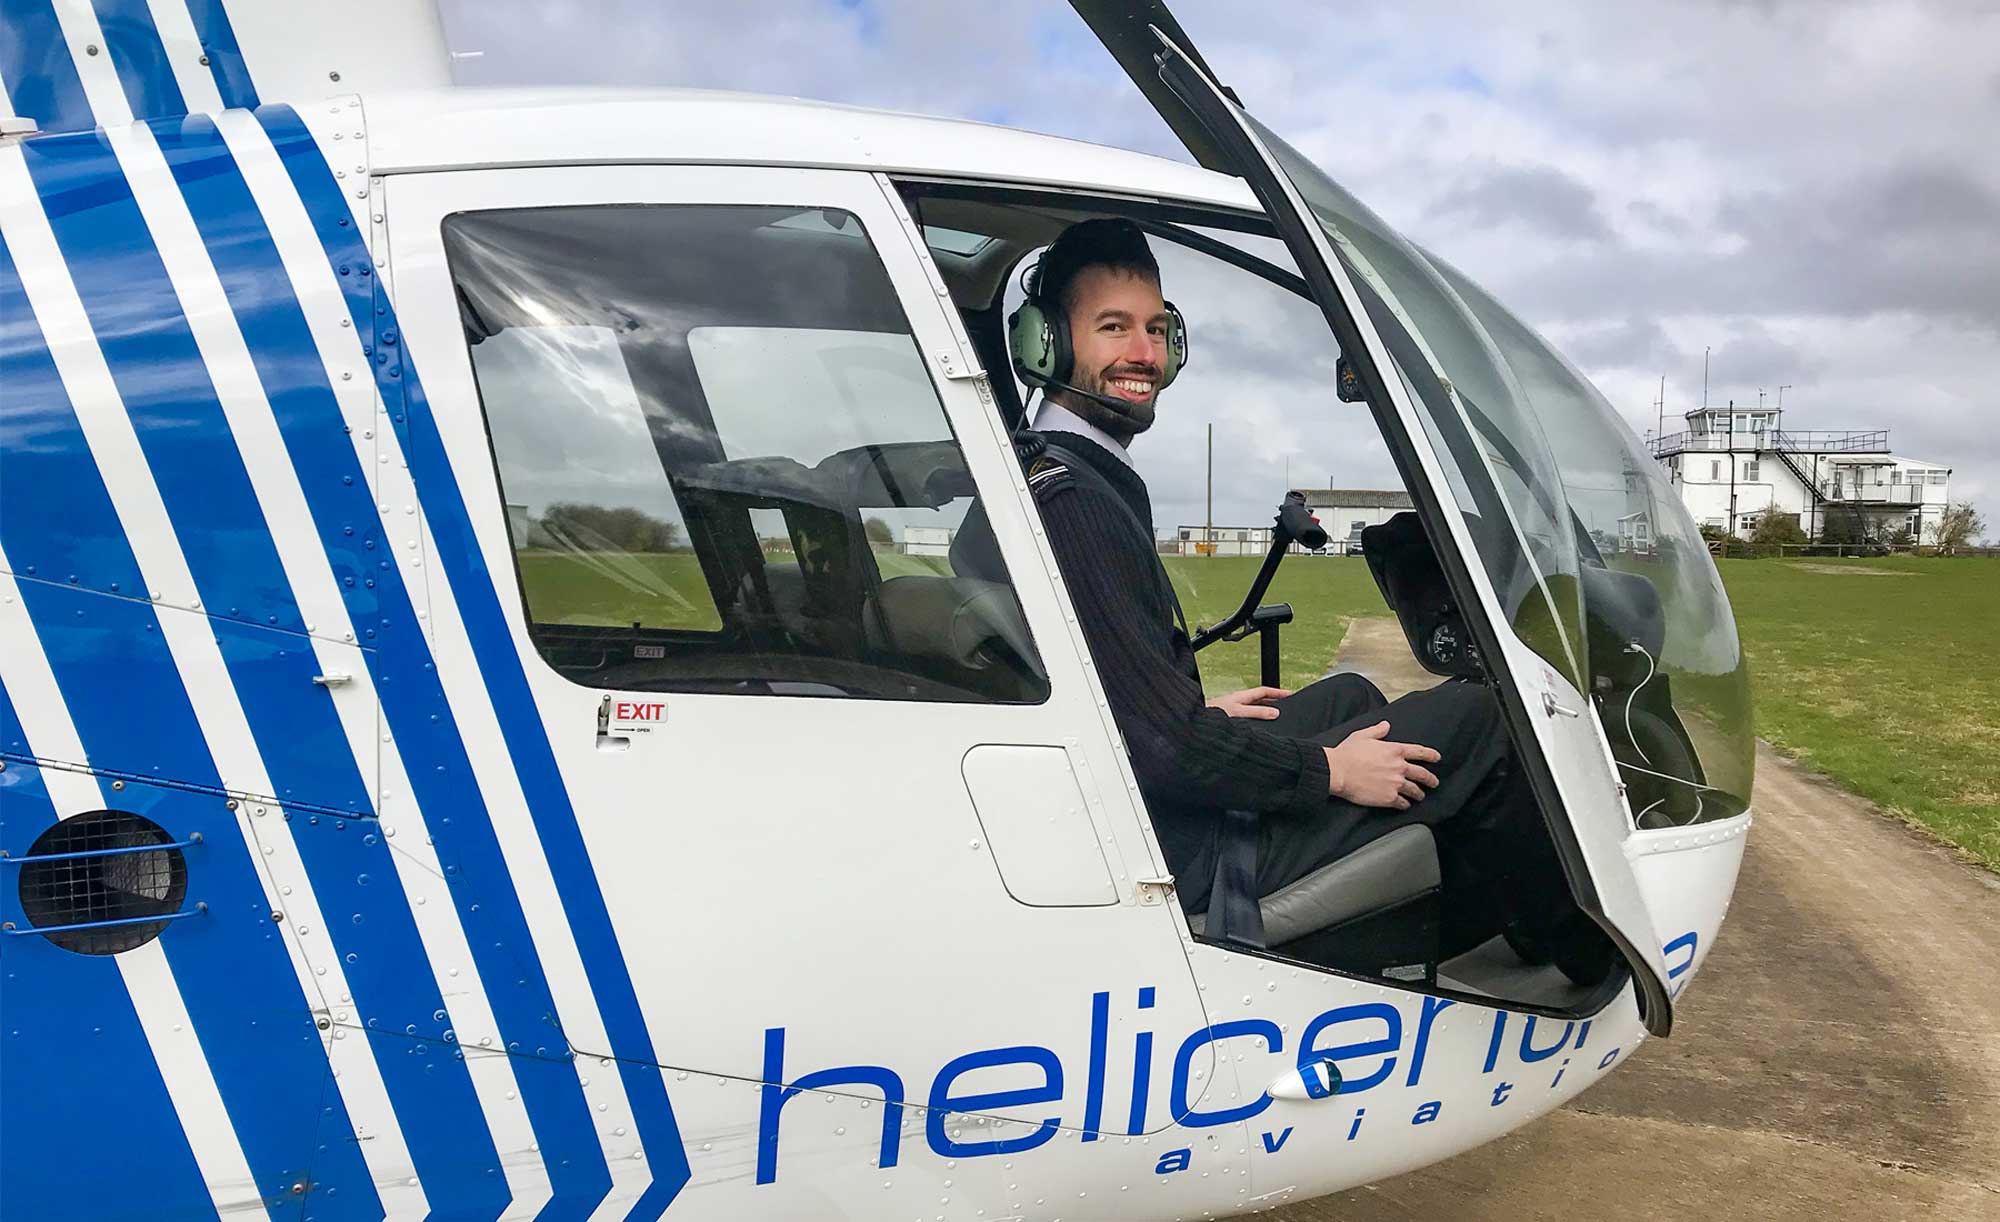 Helicentre scholarship